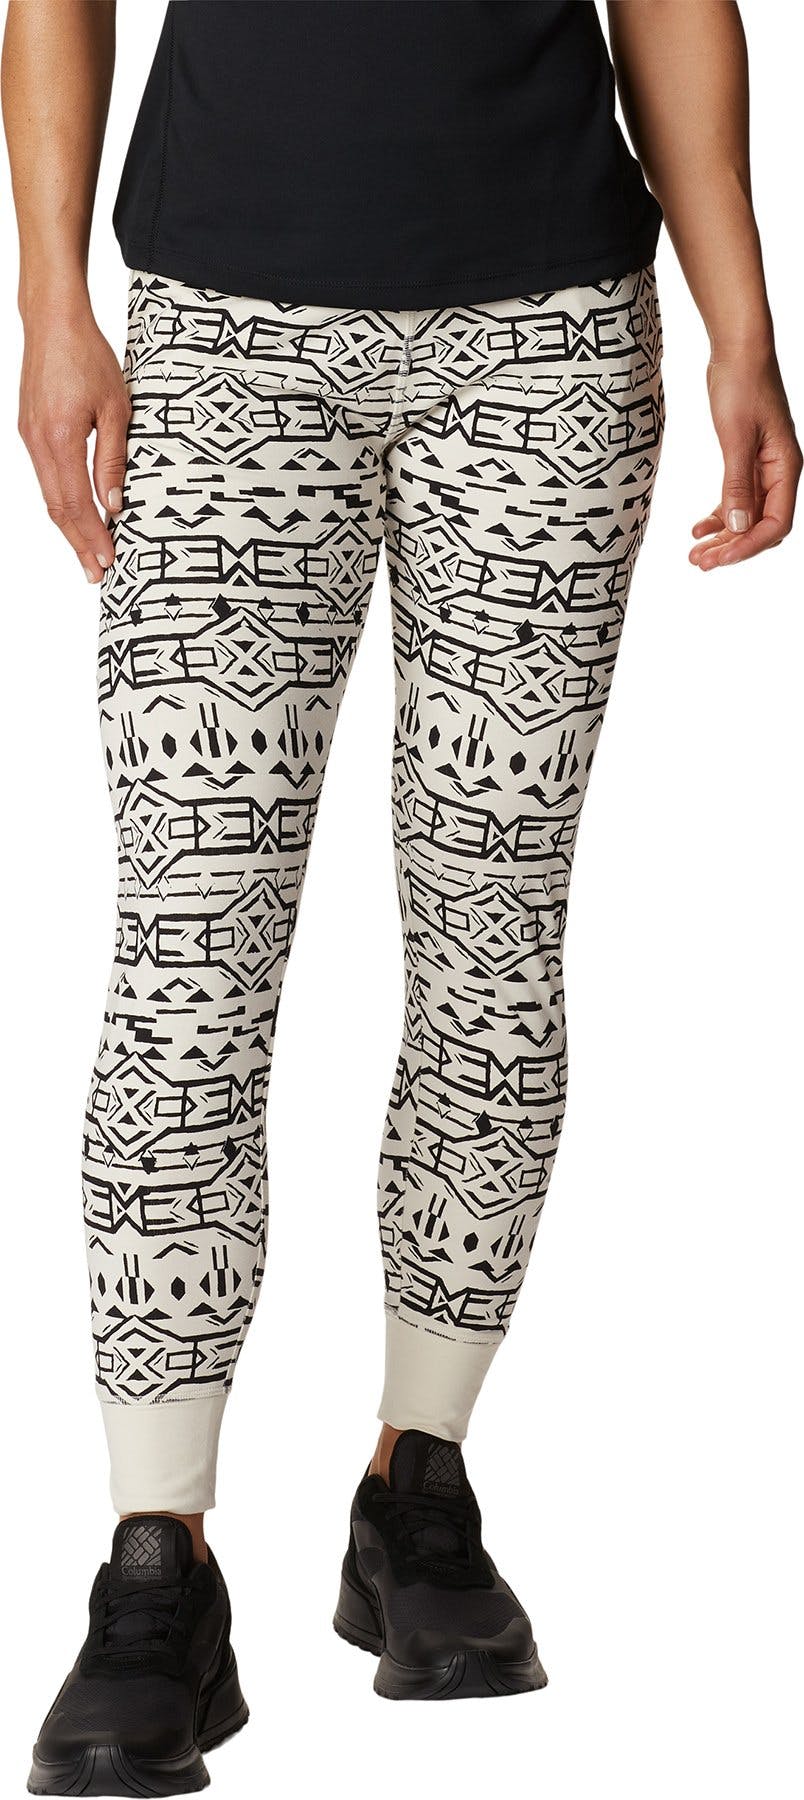 Product image for Holly Hideaway Plus Size Leggings - Women's